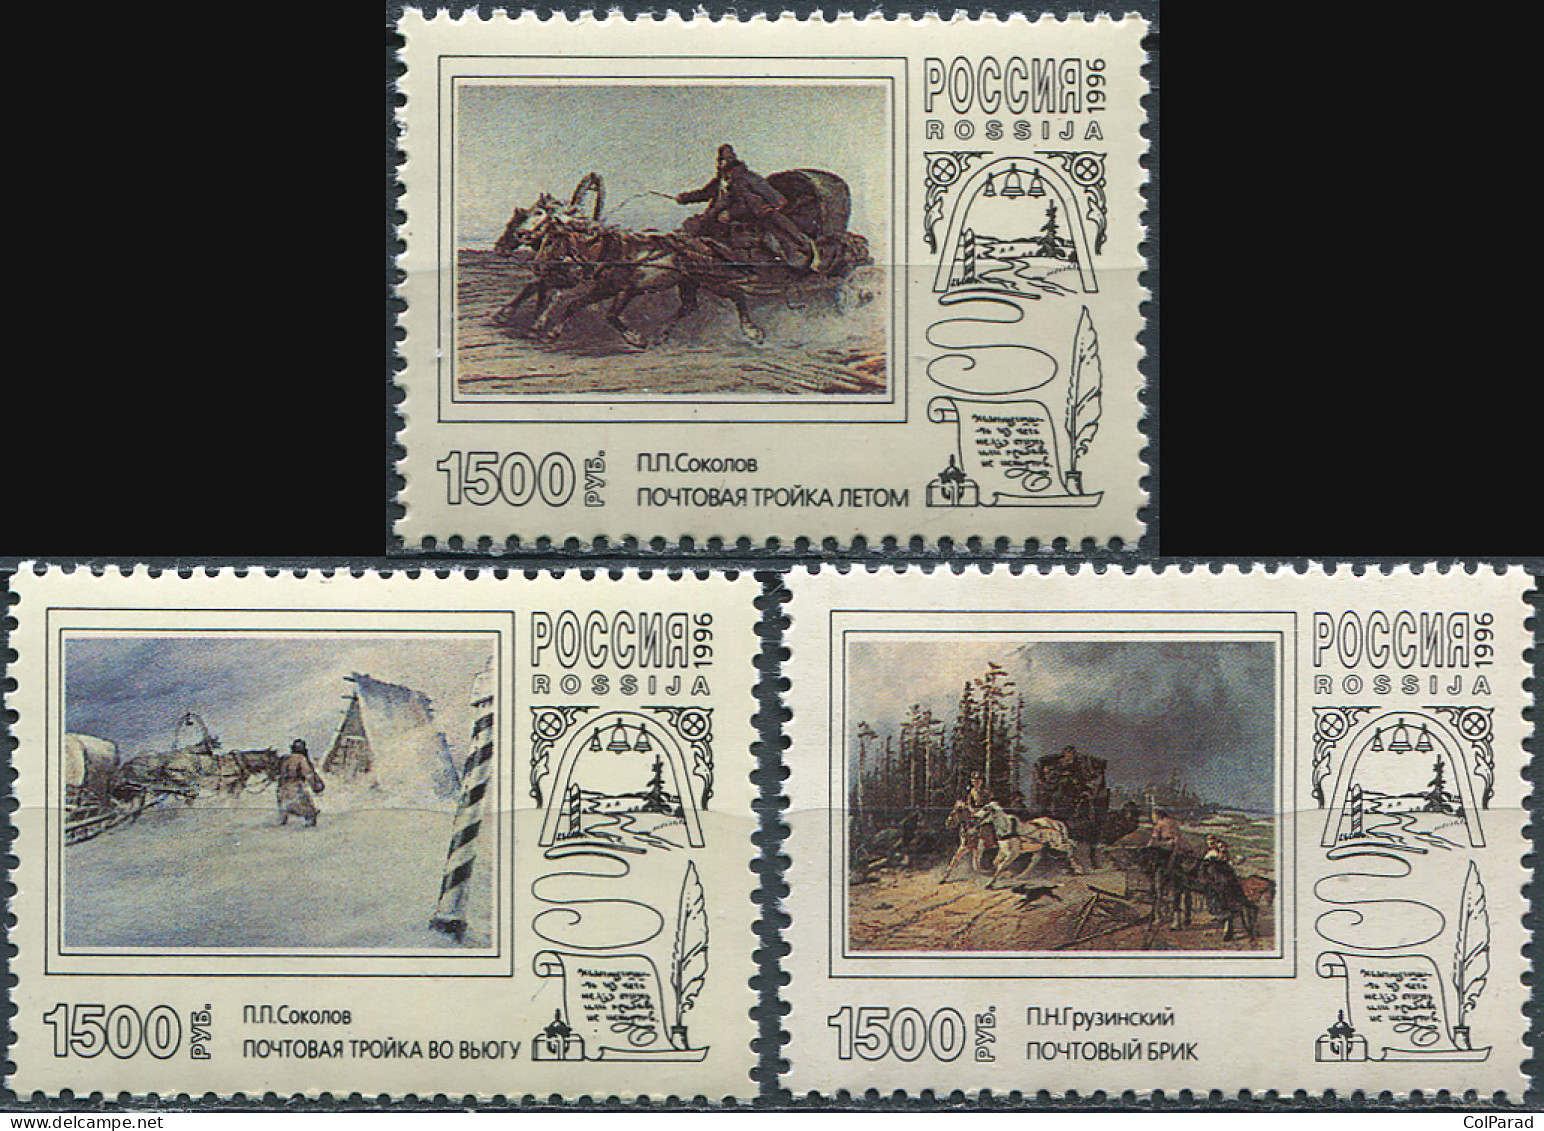 RUSSIA - 1996 - SET OF 3 STAMPS MNH ** - Postal Troikas In Paintings - Unused Stamps